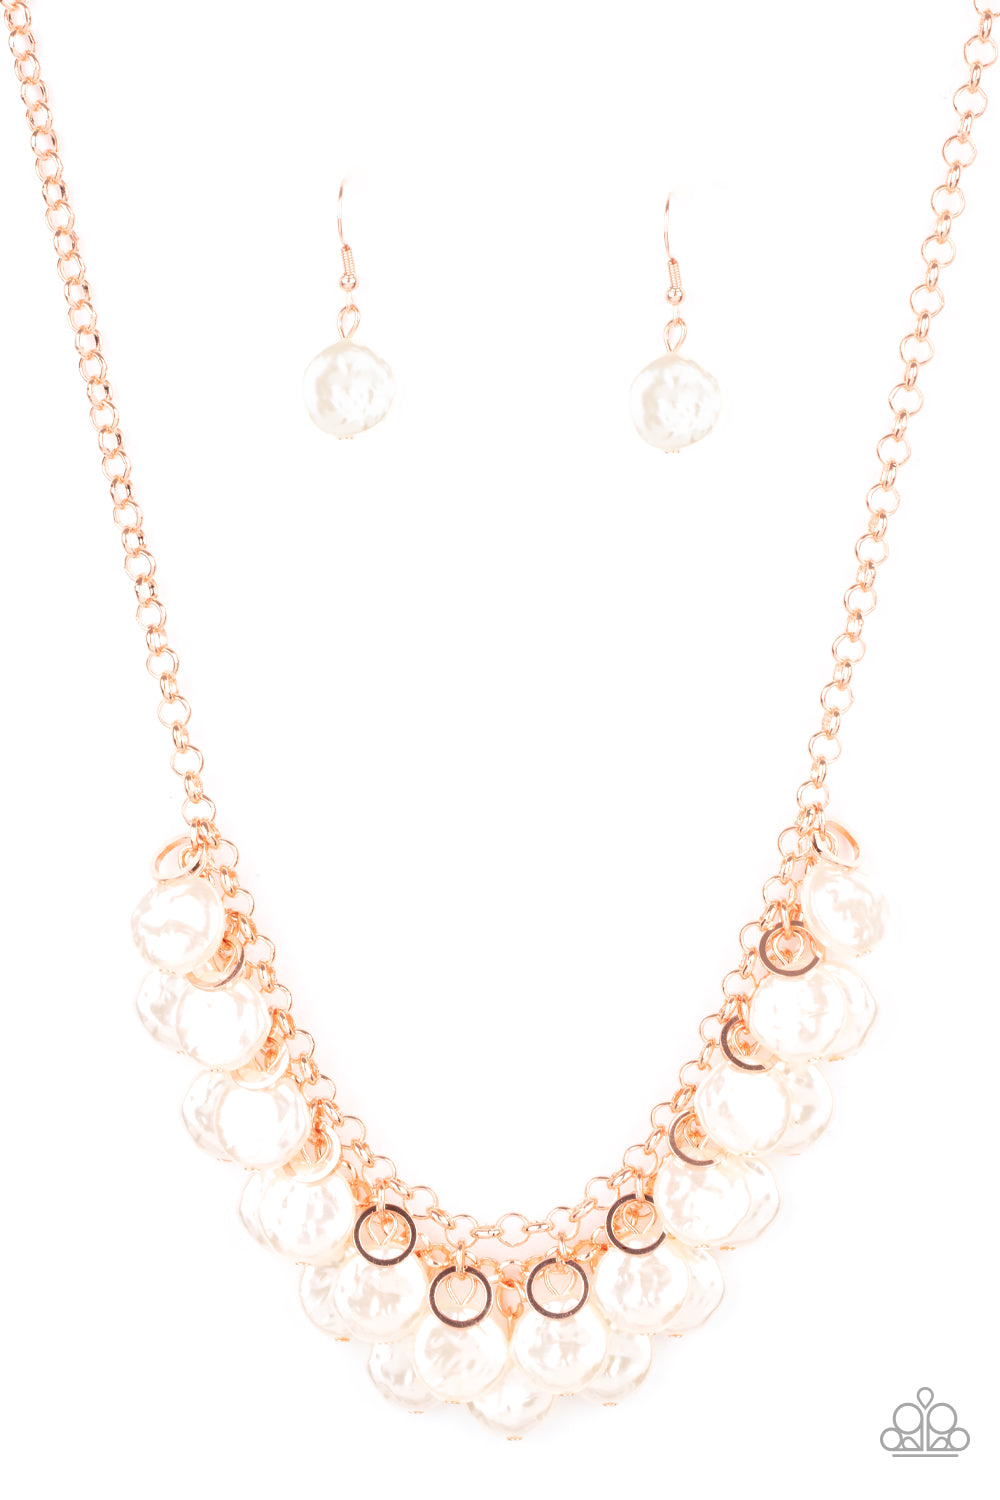 BEACHFRONT and Center - Copper necklace 2092